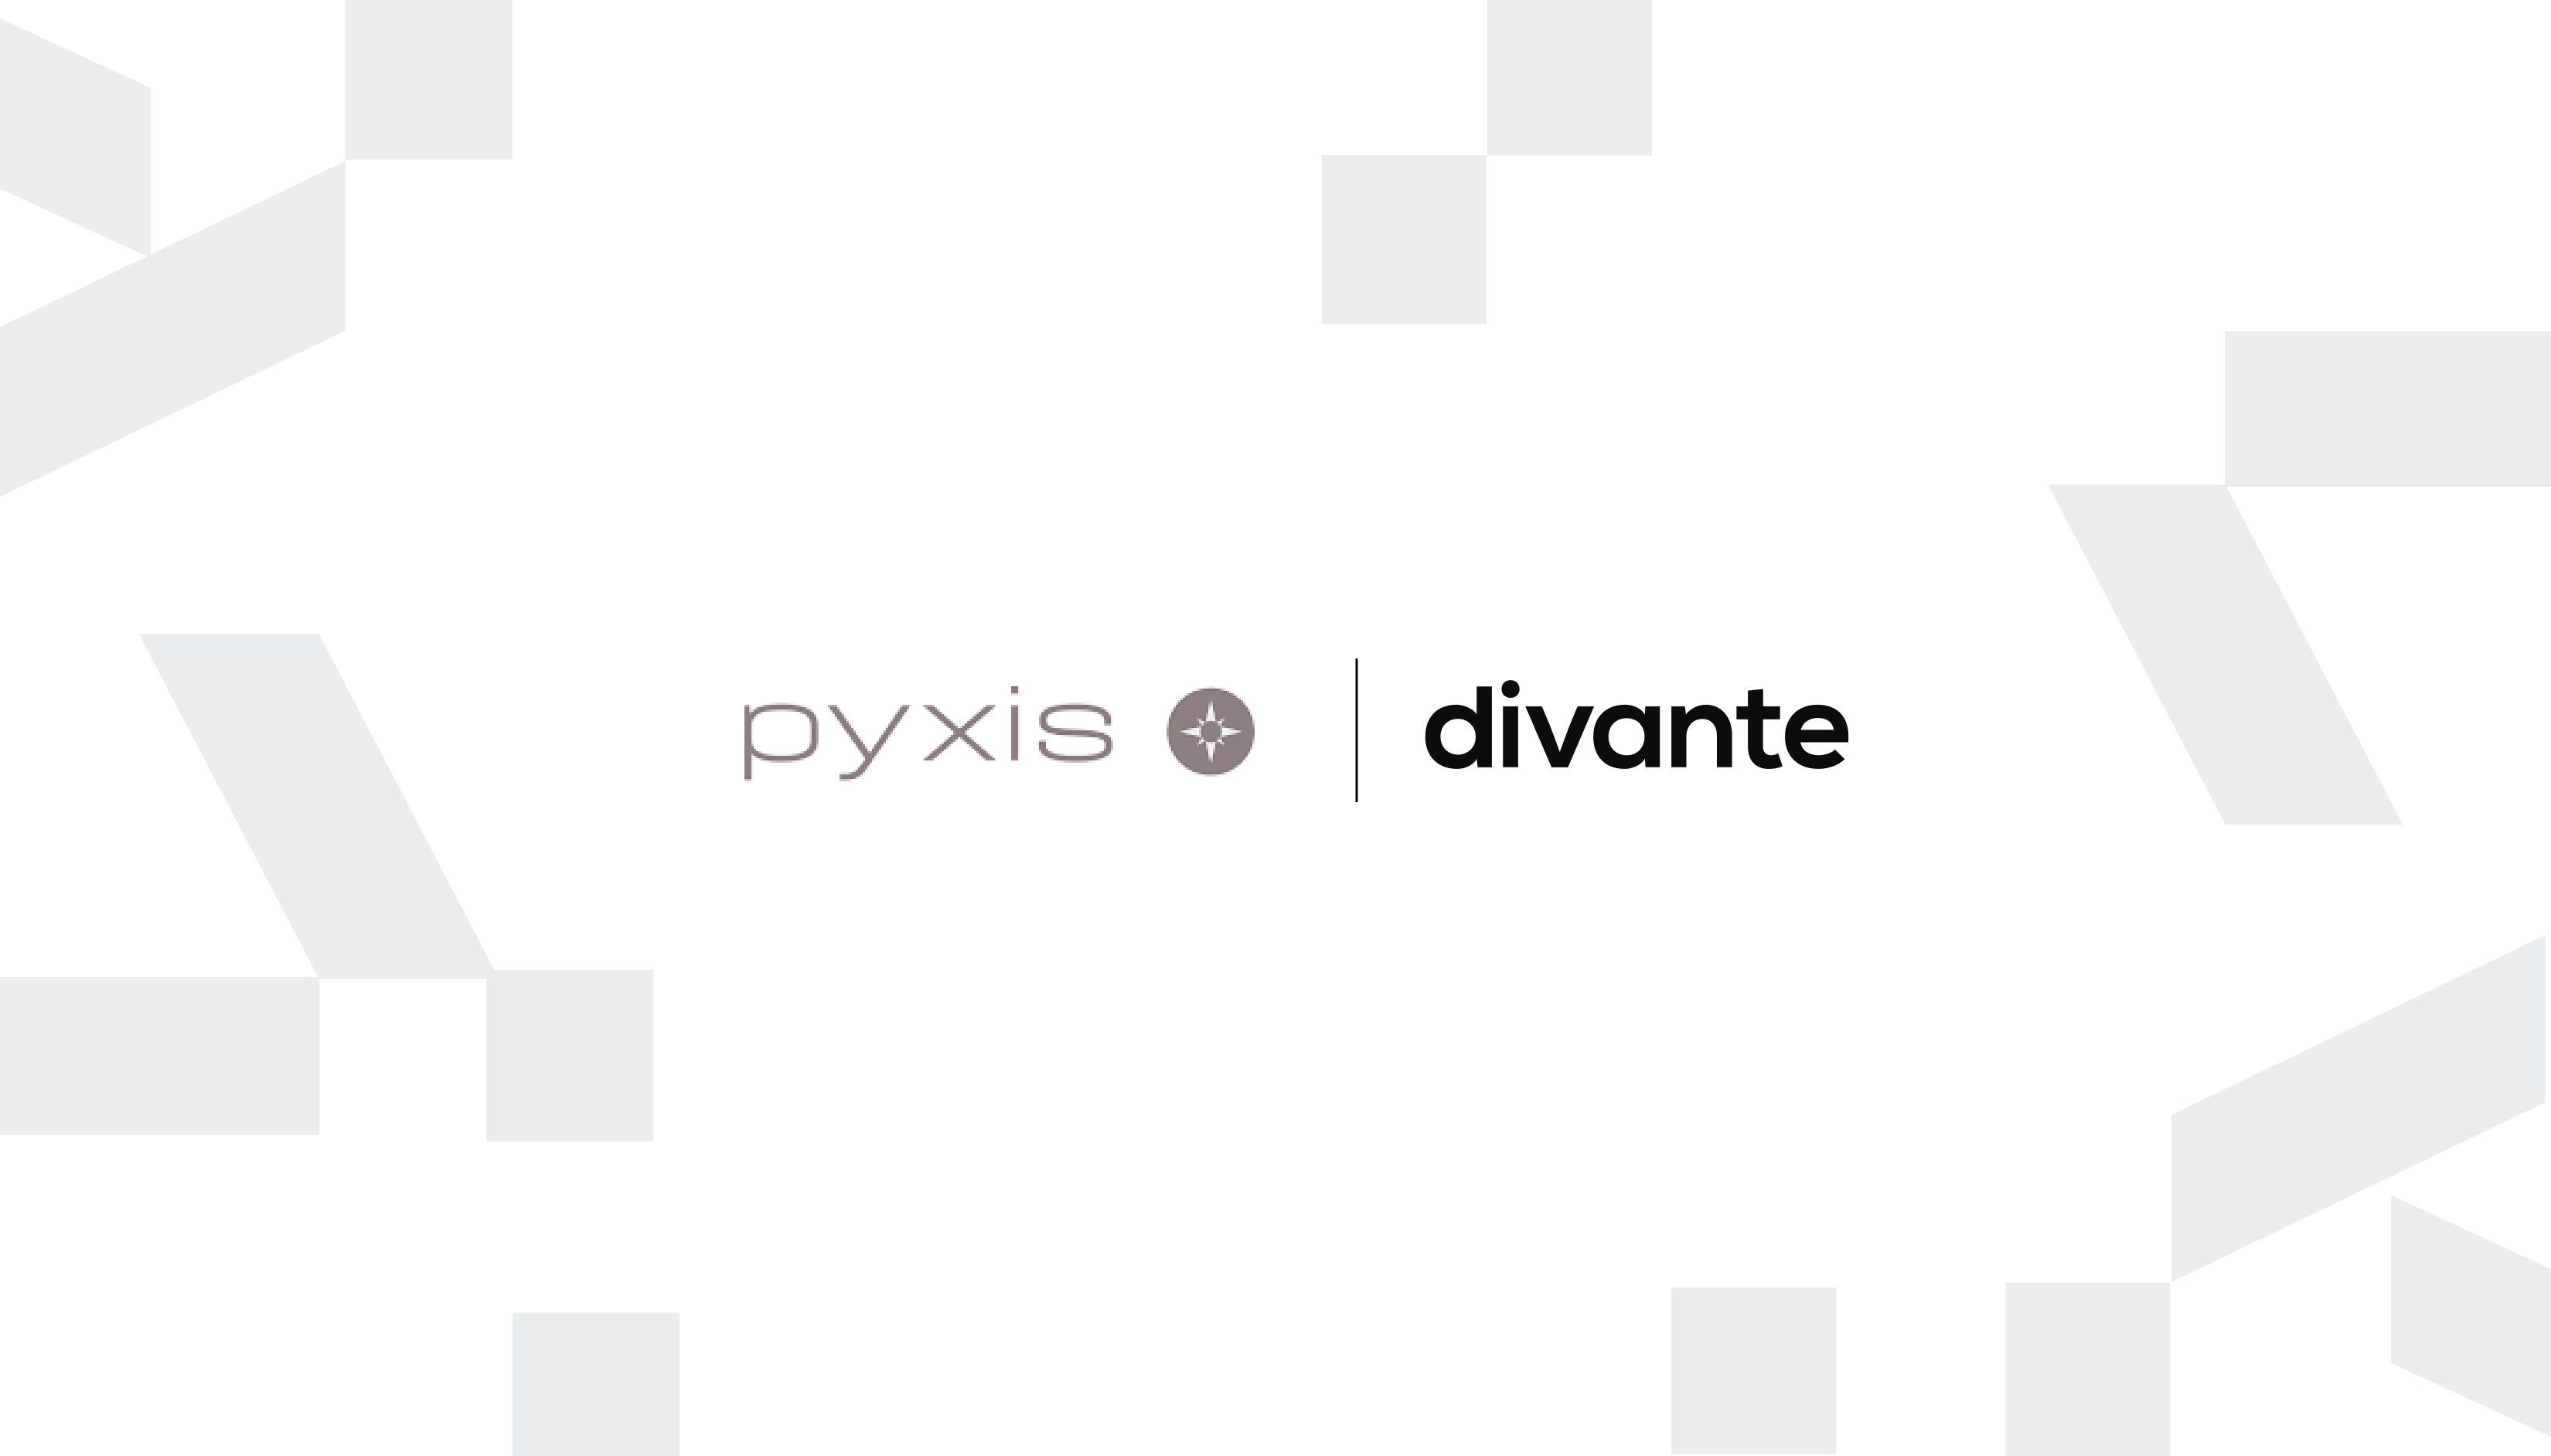 Pyxis CX and Divante join their forces to accelerate digital innovation  